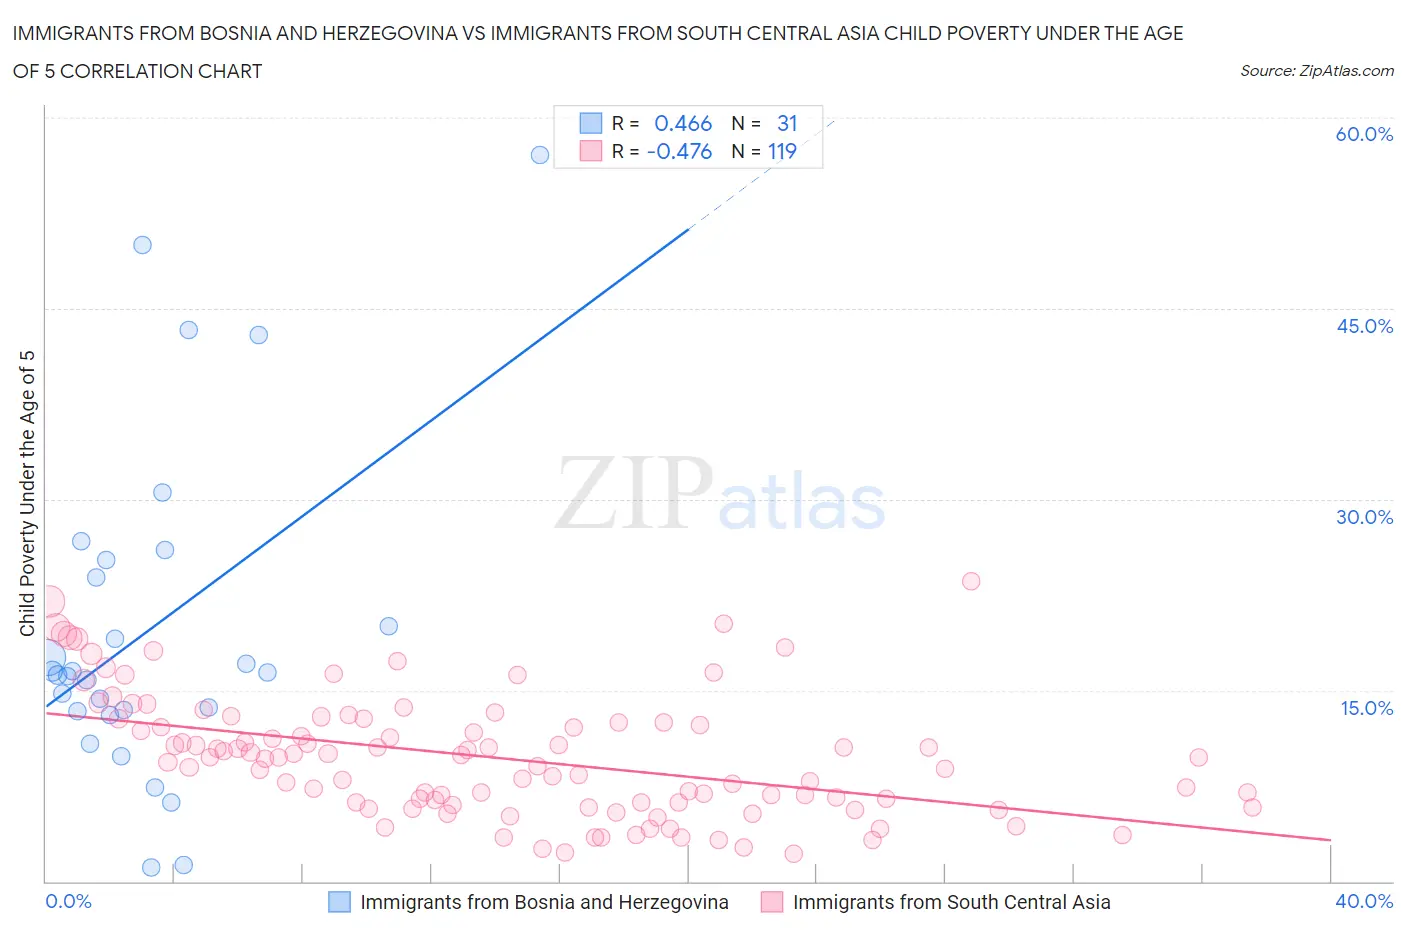 Immigrants from Bosnia and Herzegovina vs Immigrants from South Central Asia Child Poverty Under the Age of 5